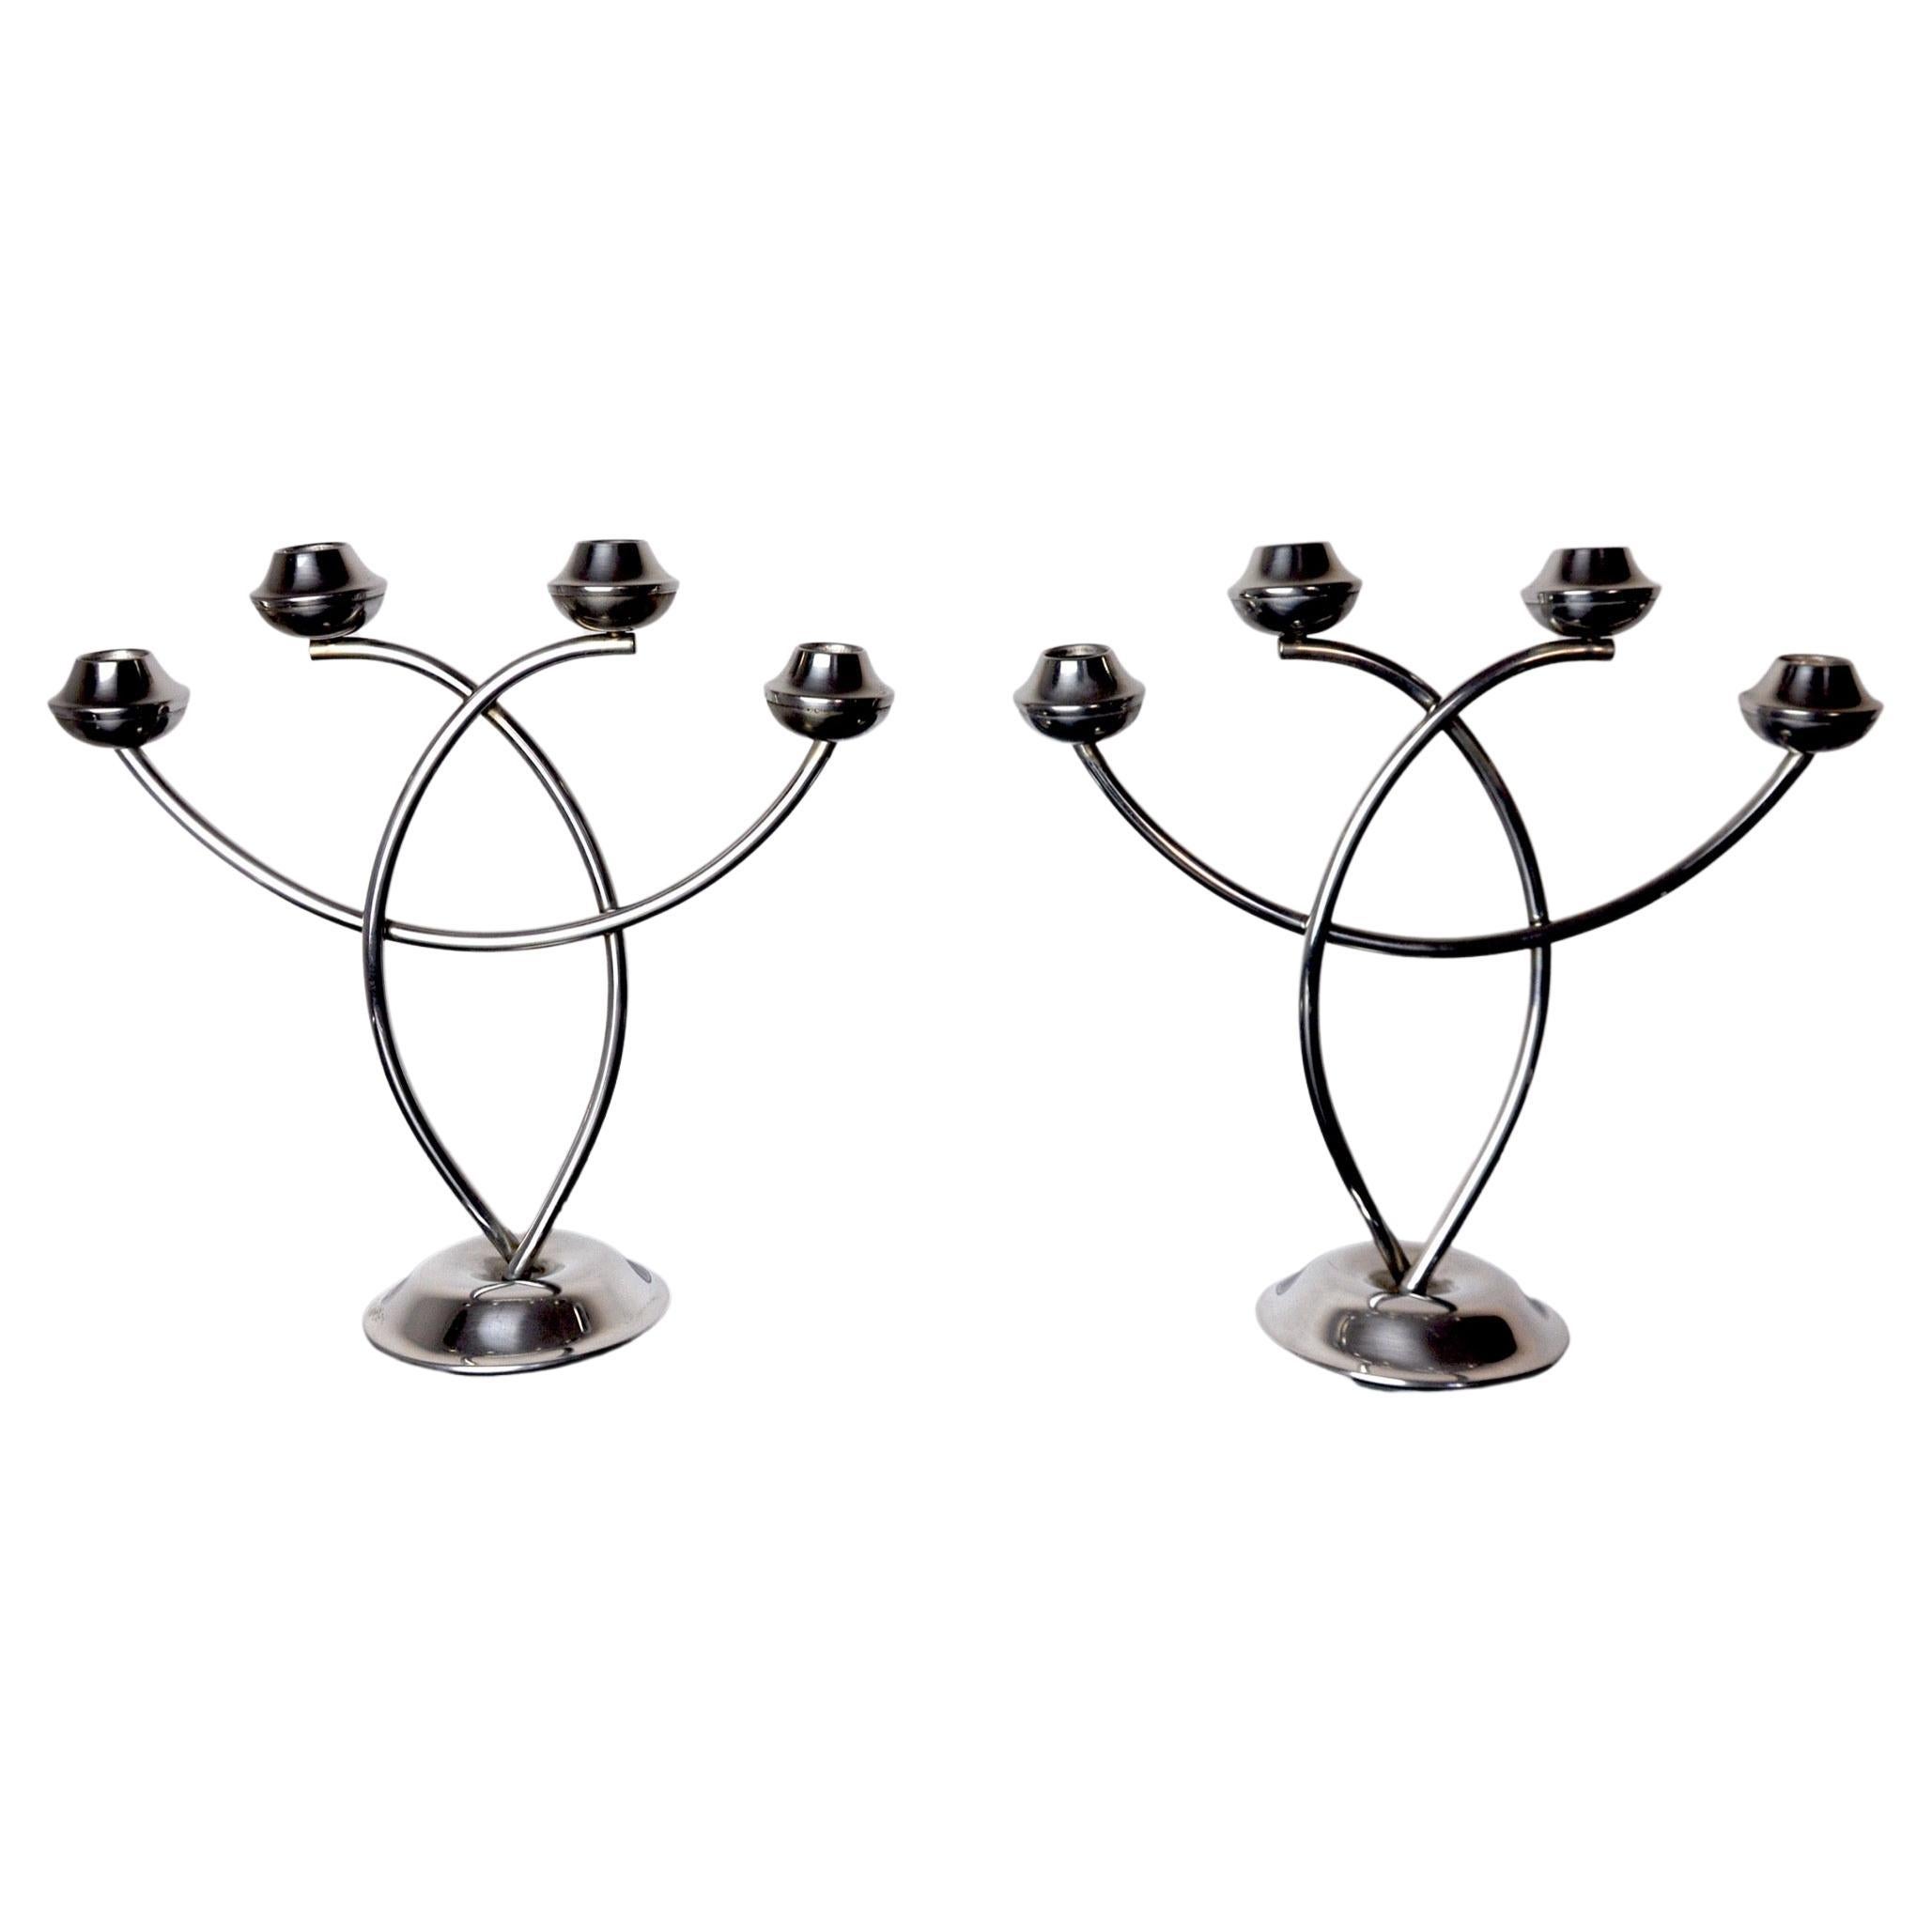 Pair of Art Deco Candle Holder in Stainless Steel 4 Flammes, Spain, 1970 For Sale